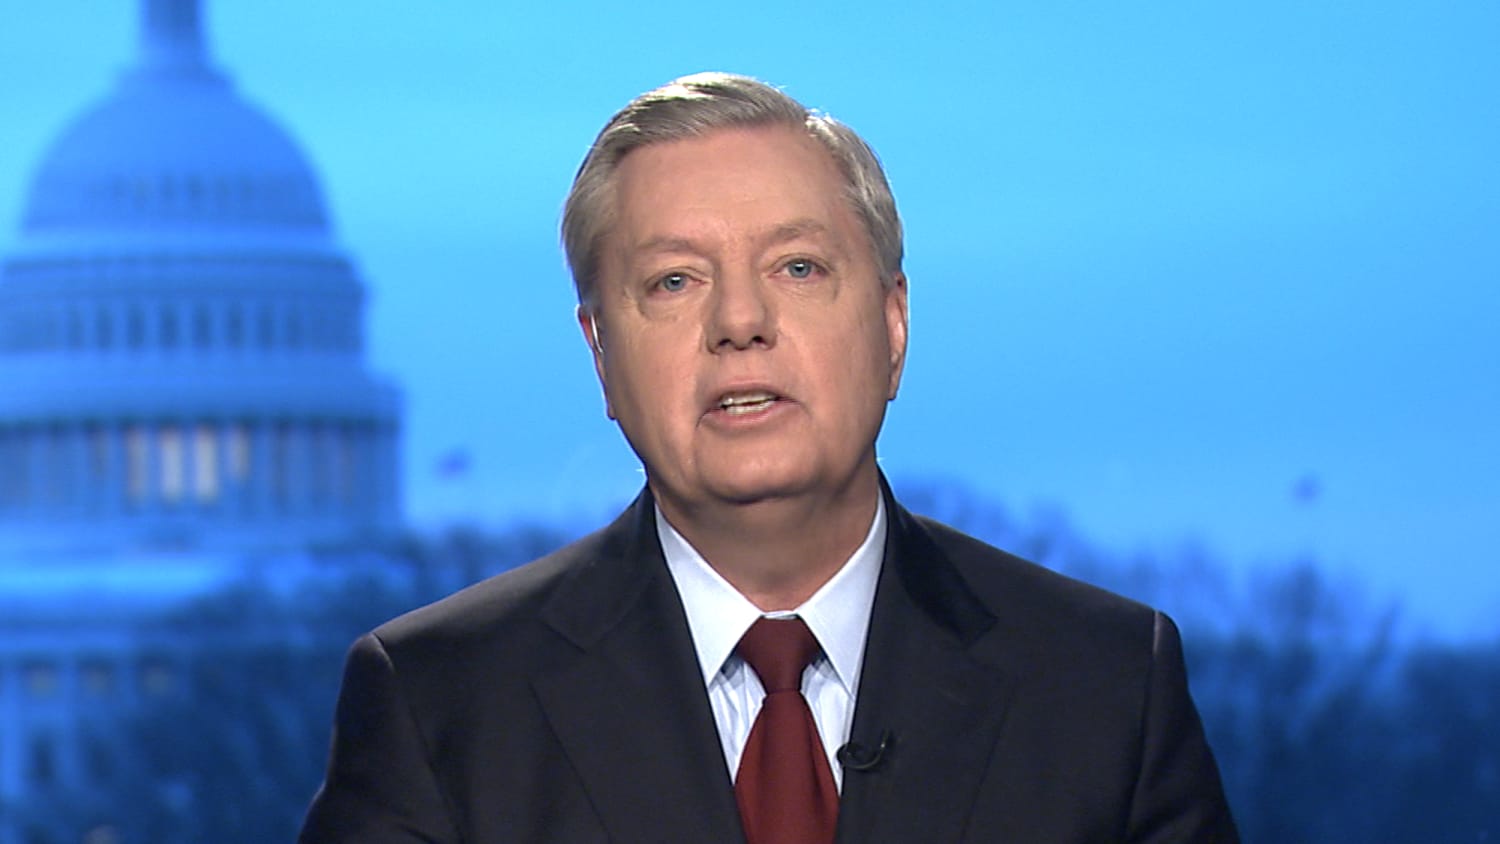 Lindsey Graham on Trump wiretap claims: 'If it's not true, just tell me' - TODAY.com2500 x 1407